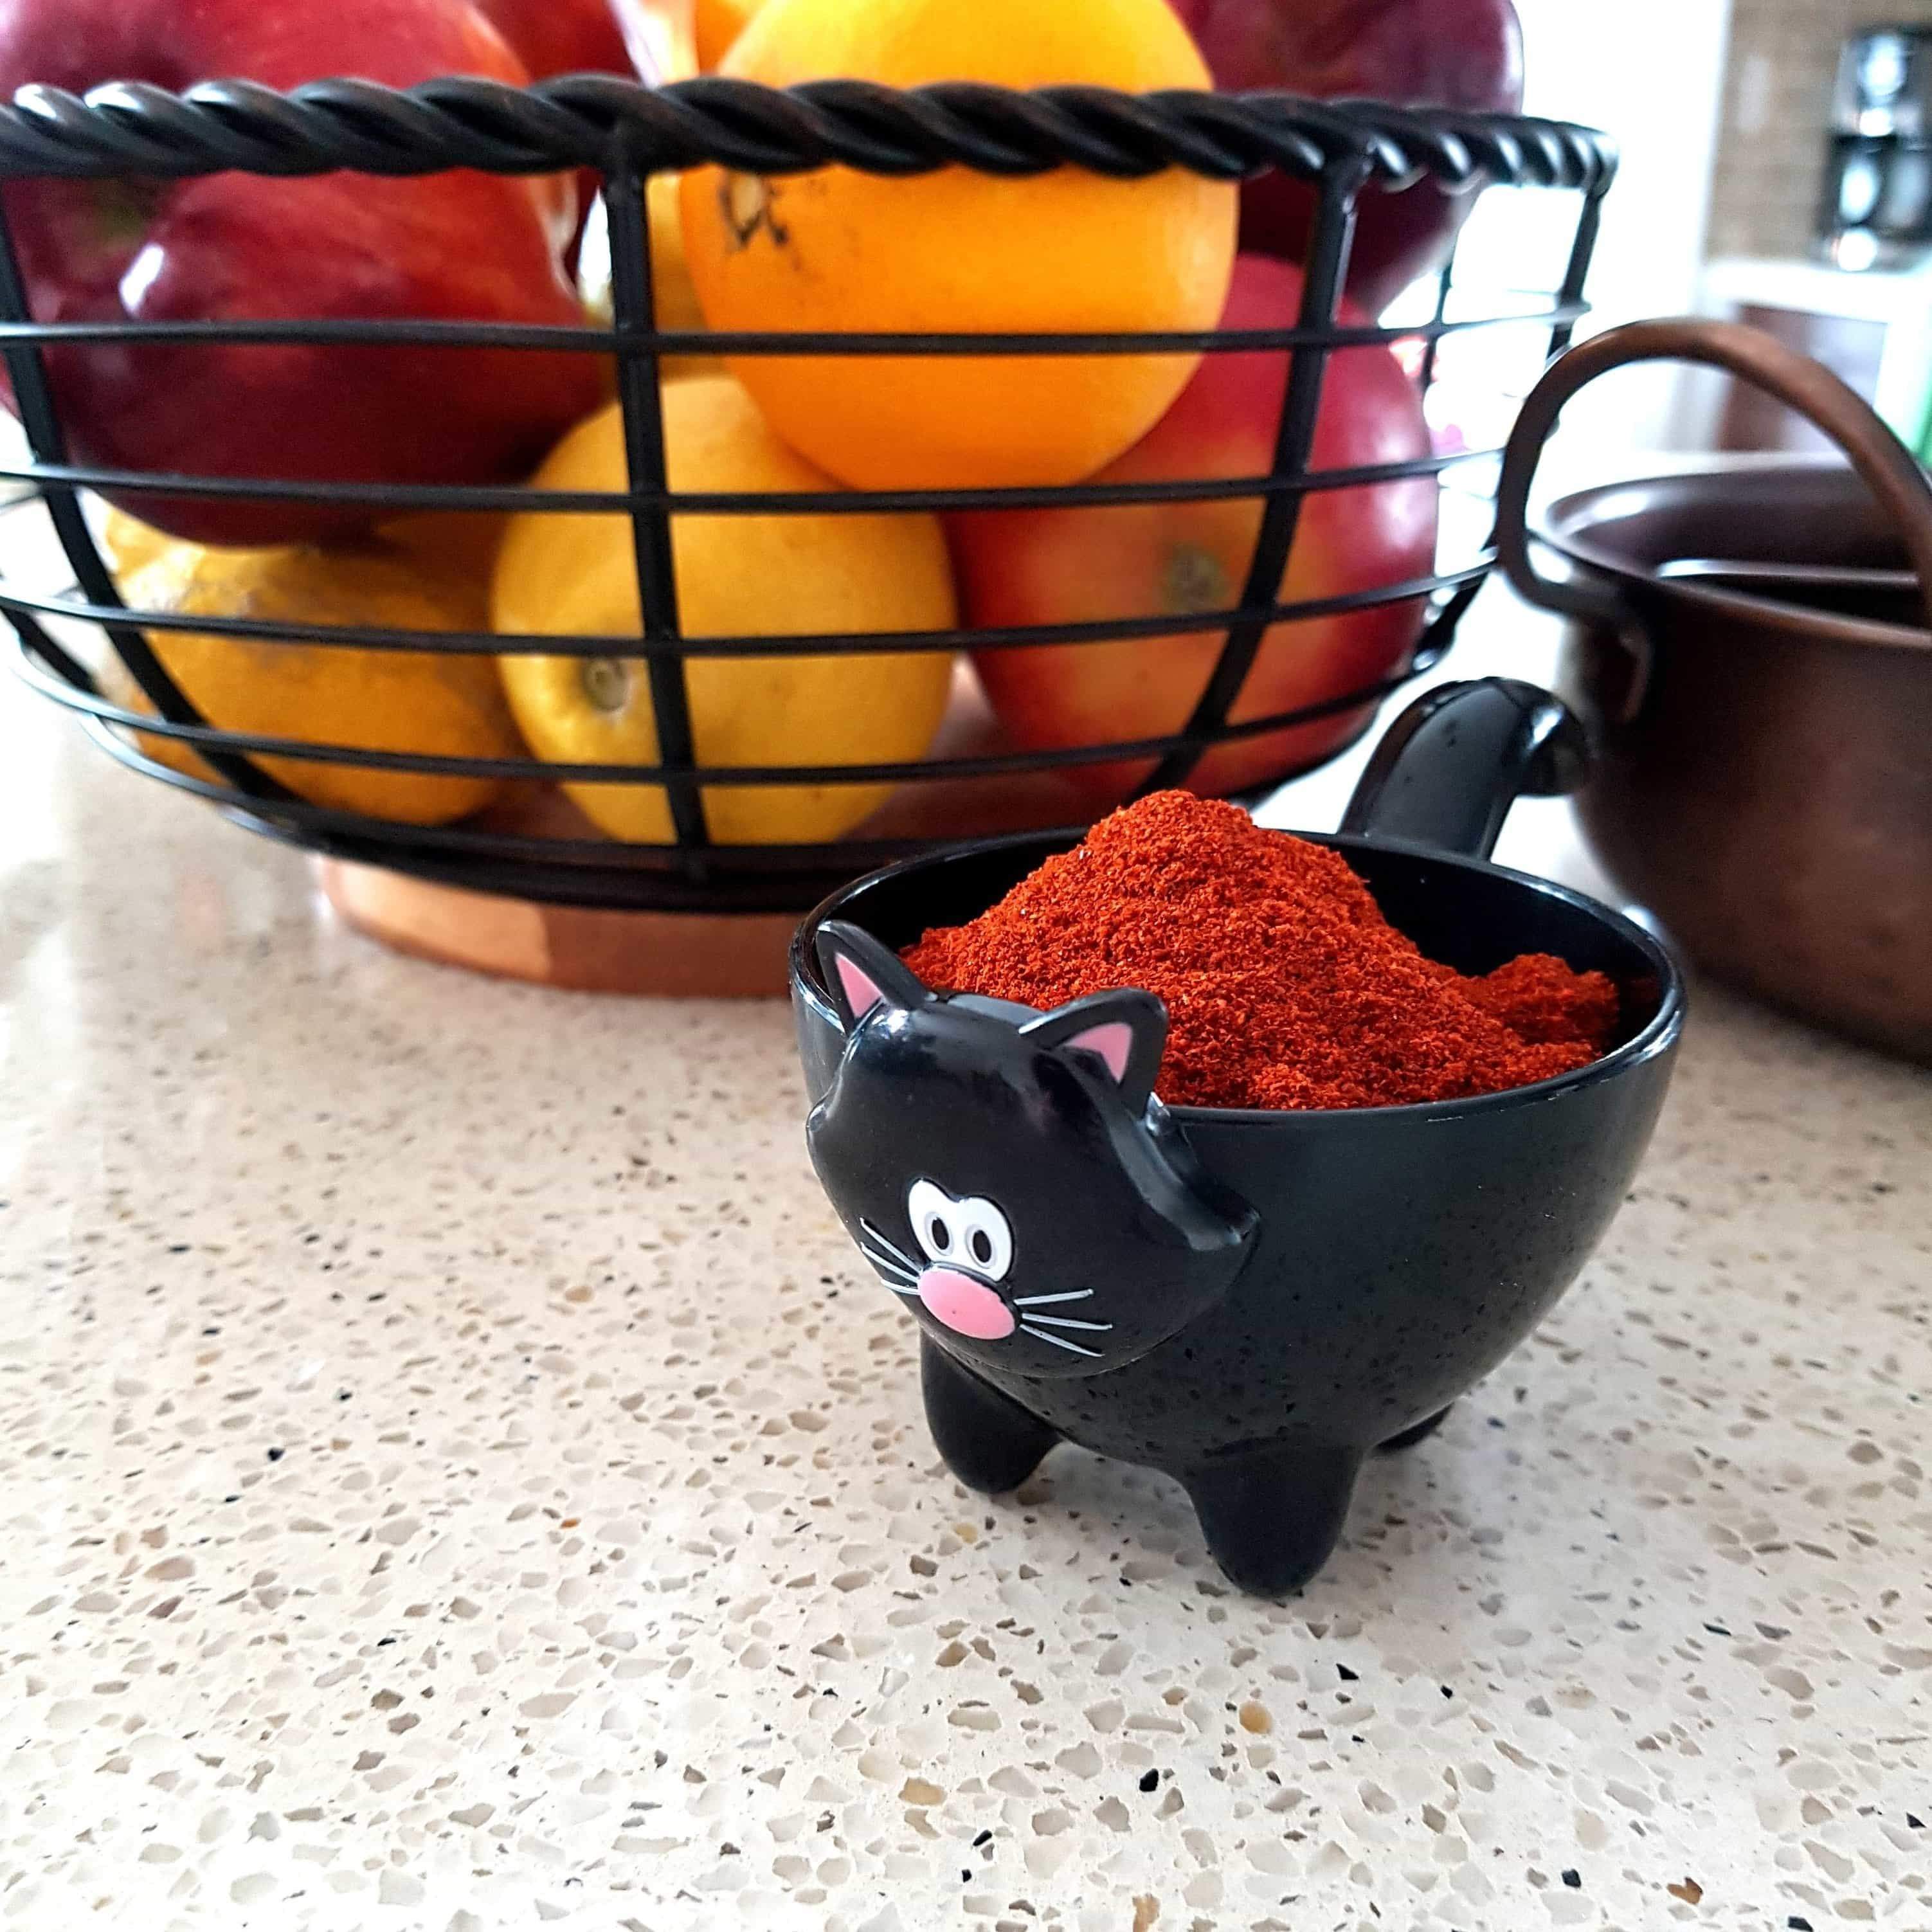 Cat Things for Cat Lovers, Cute Measuring Cup Shaped Like a Black Cat